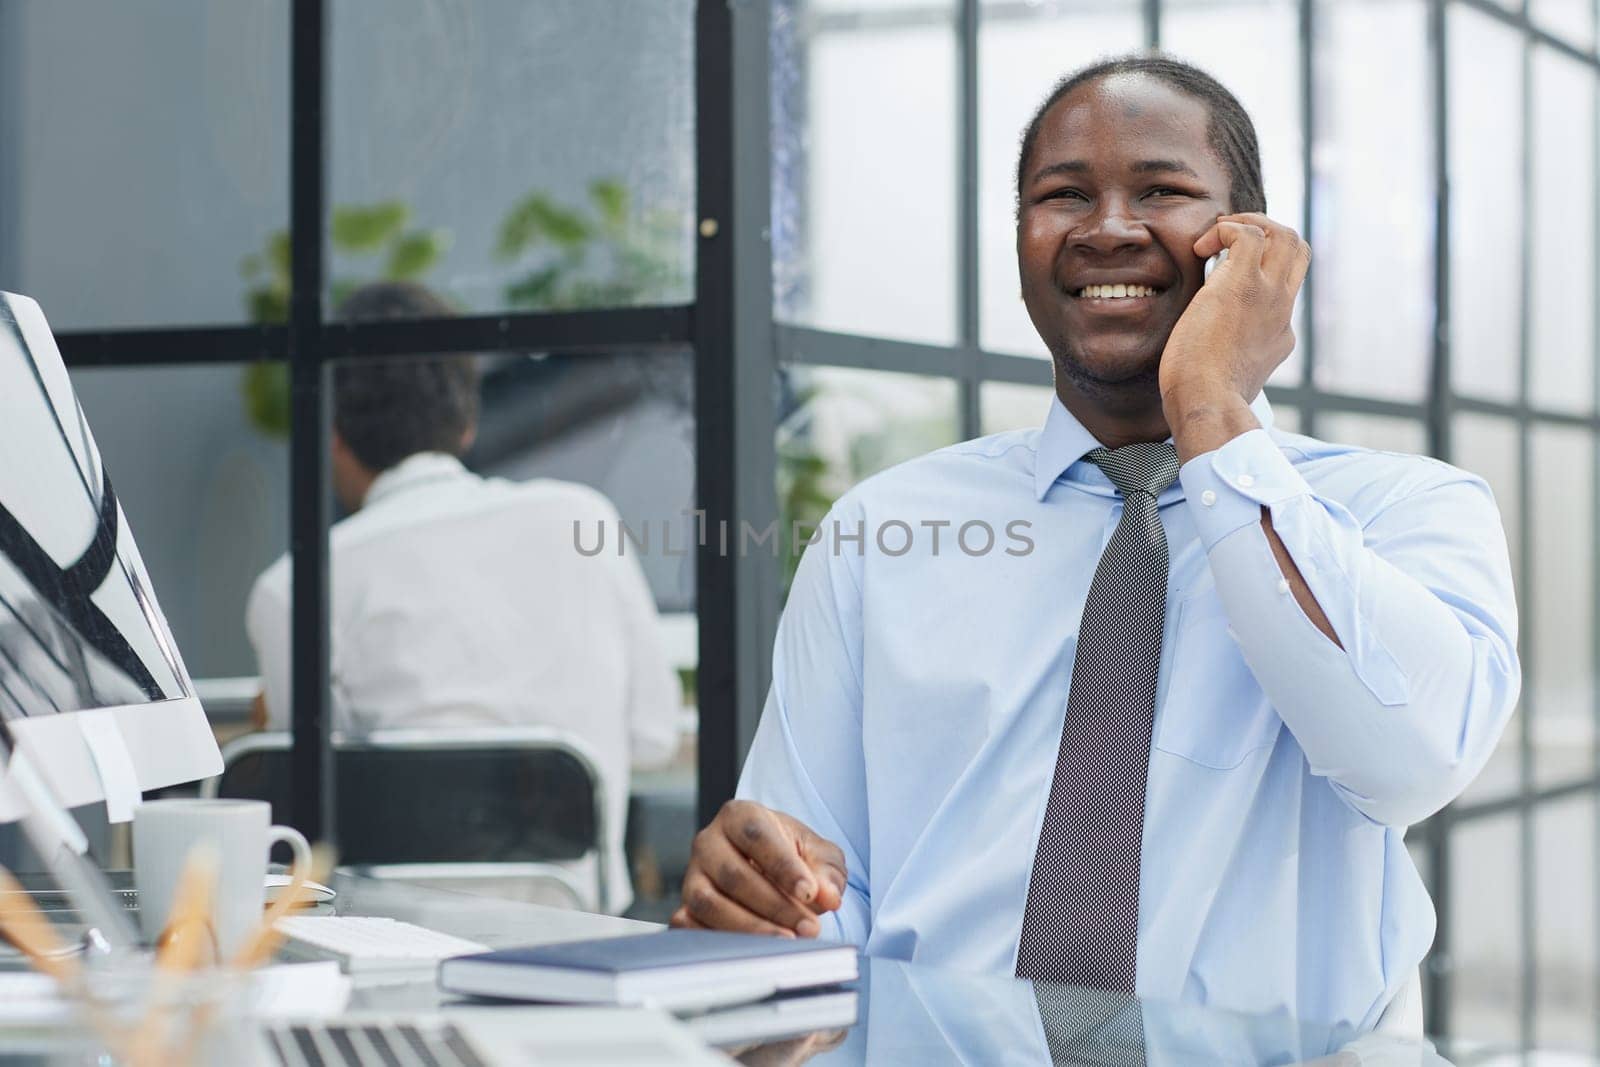 a man at a workplace at a table in front of a computer speaks on the phone.